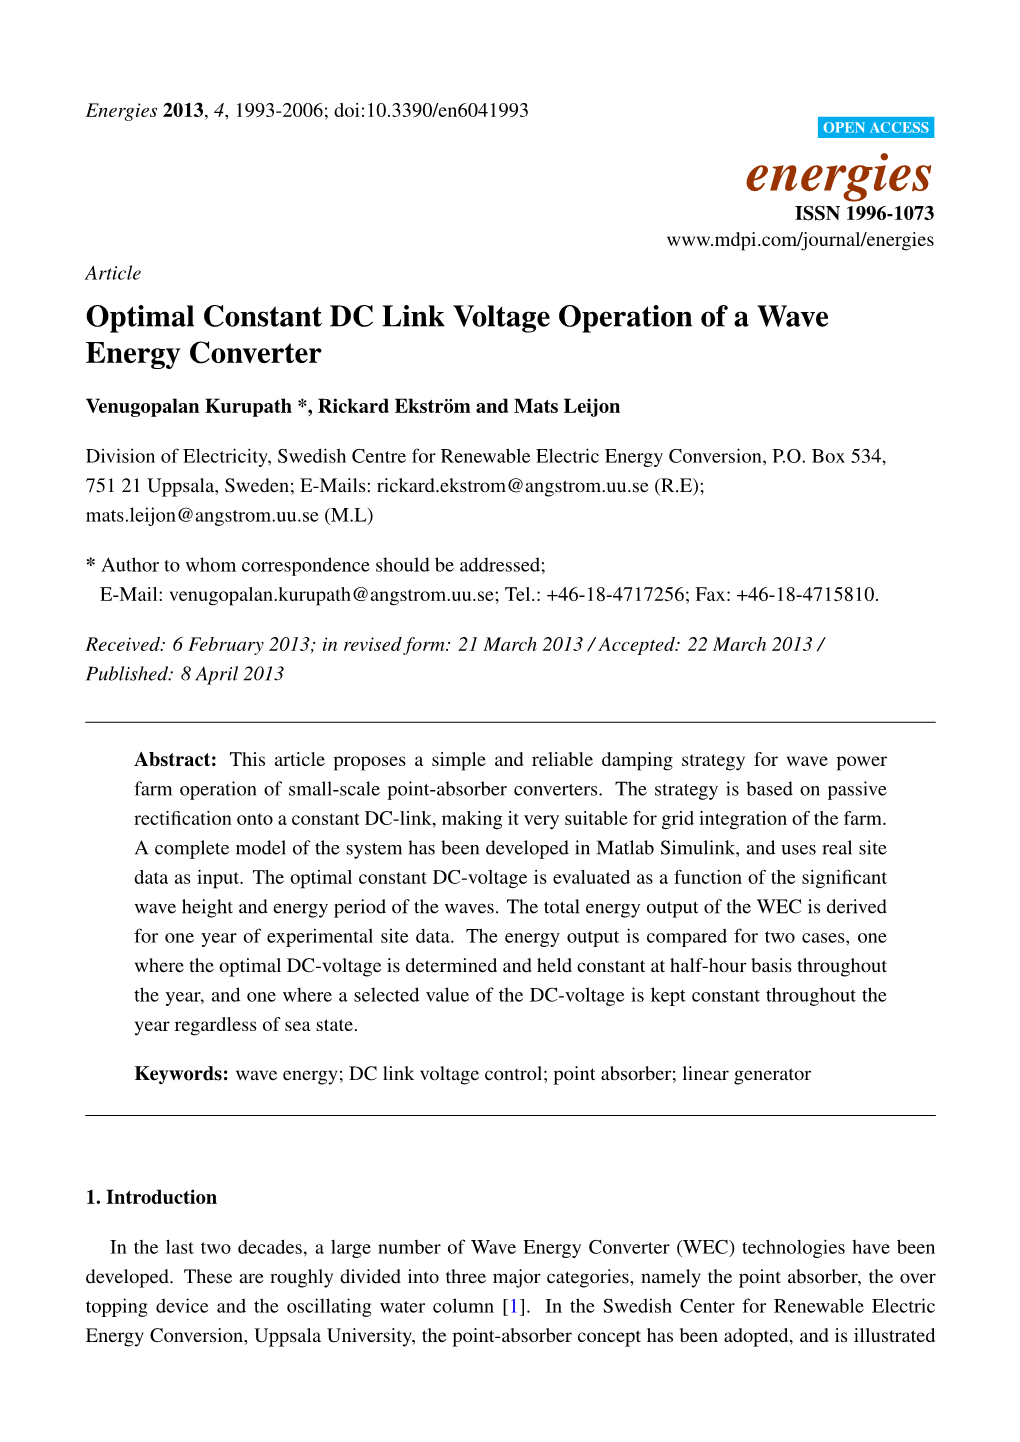 Optimal Constant DC Link Voltage Operation of a Wave Energy Converter